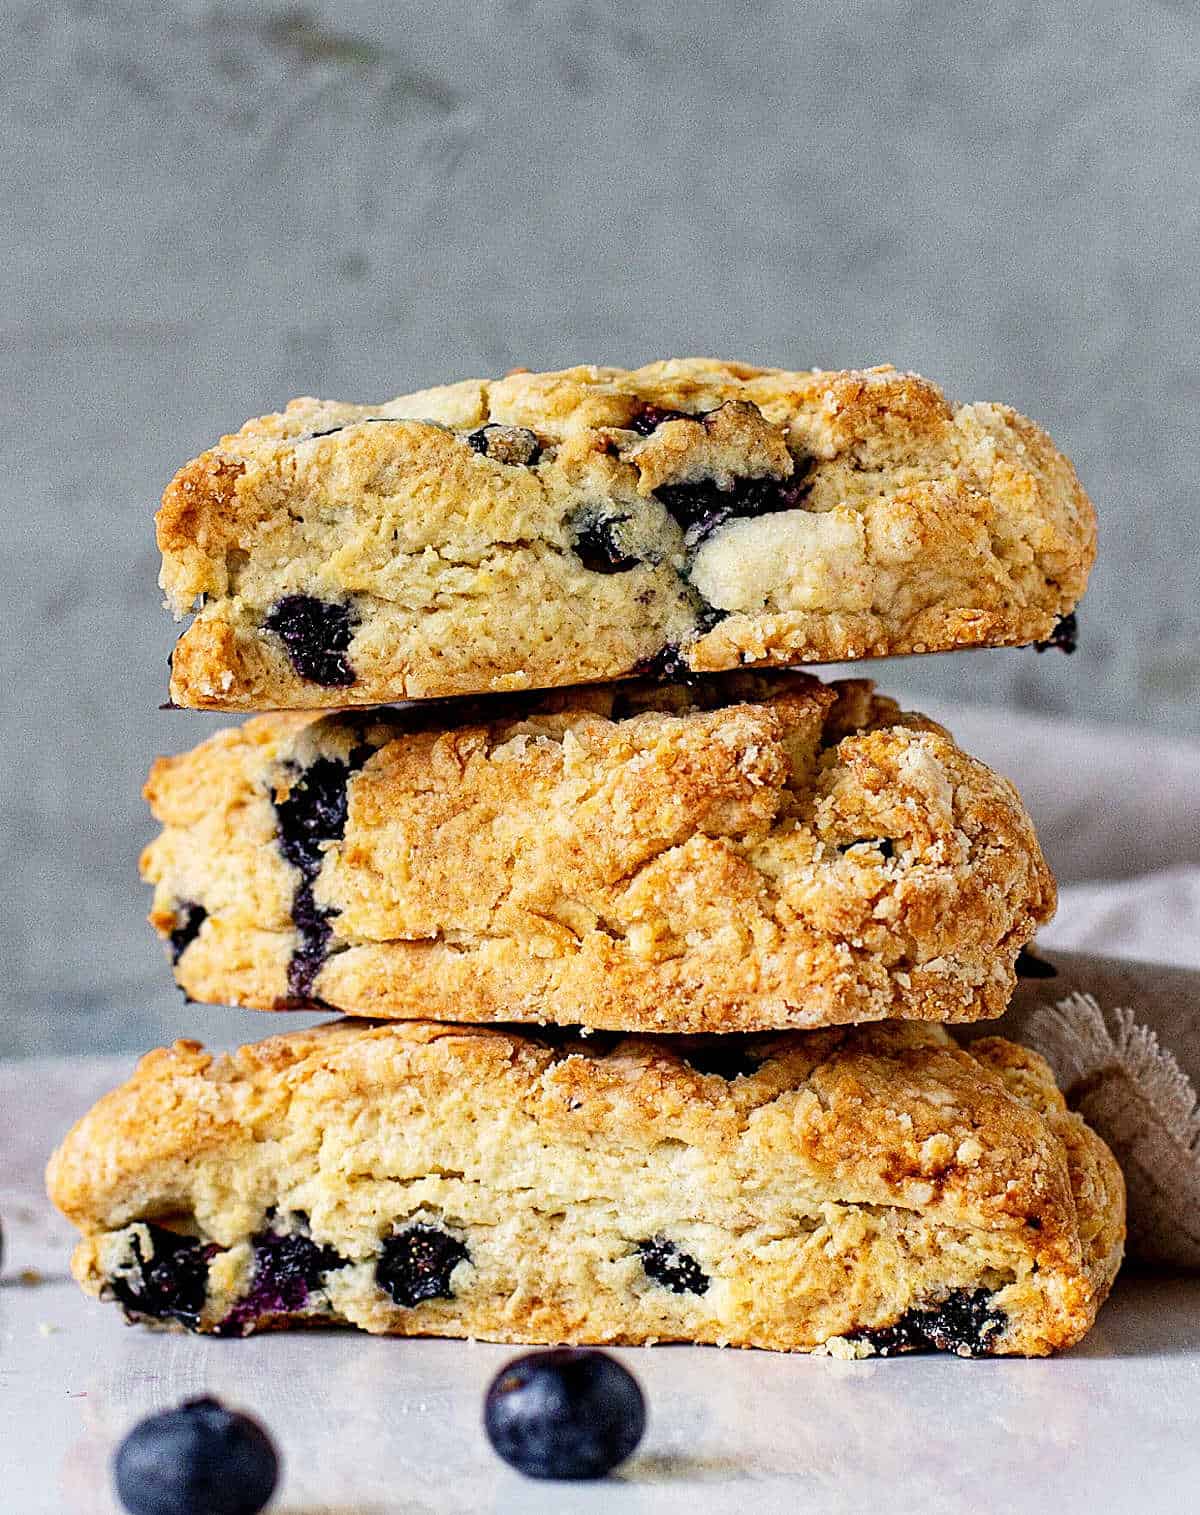 Stack of three blueberry scones on white surface and grey background.